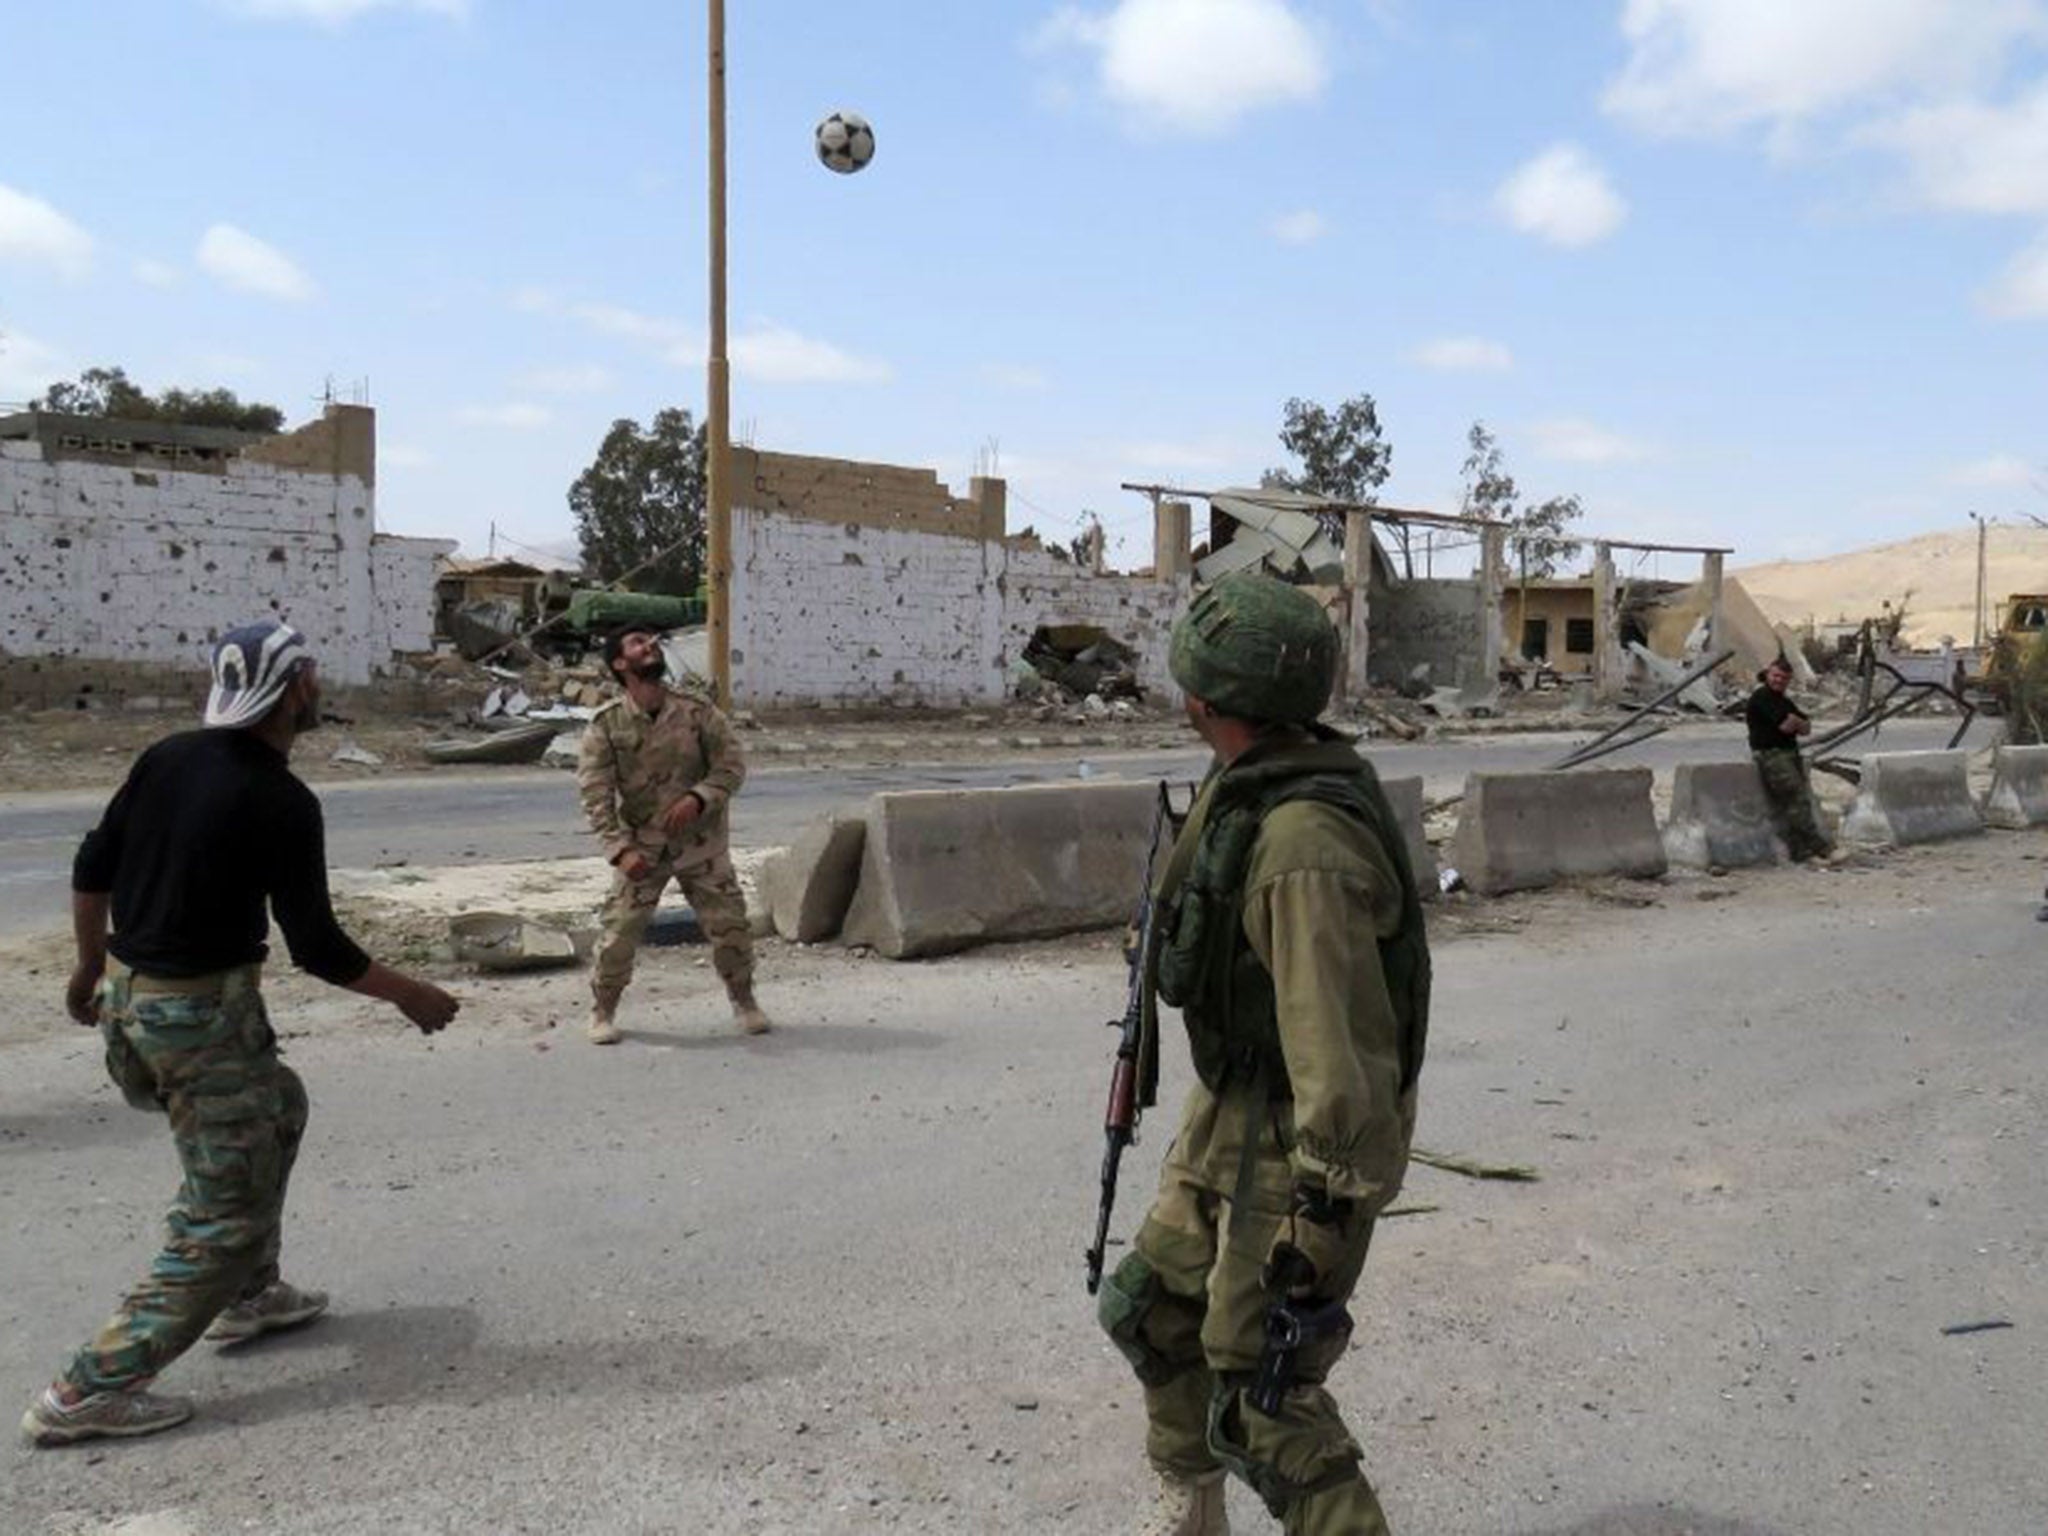 Syrian soldiers were recorded playing football while still in their combat gear